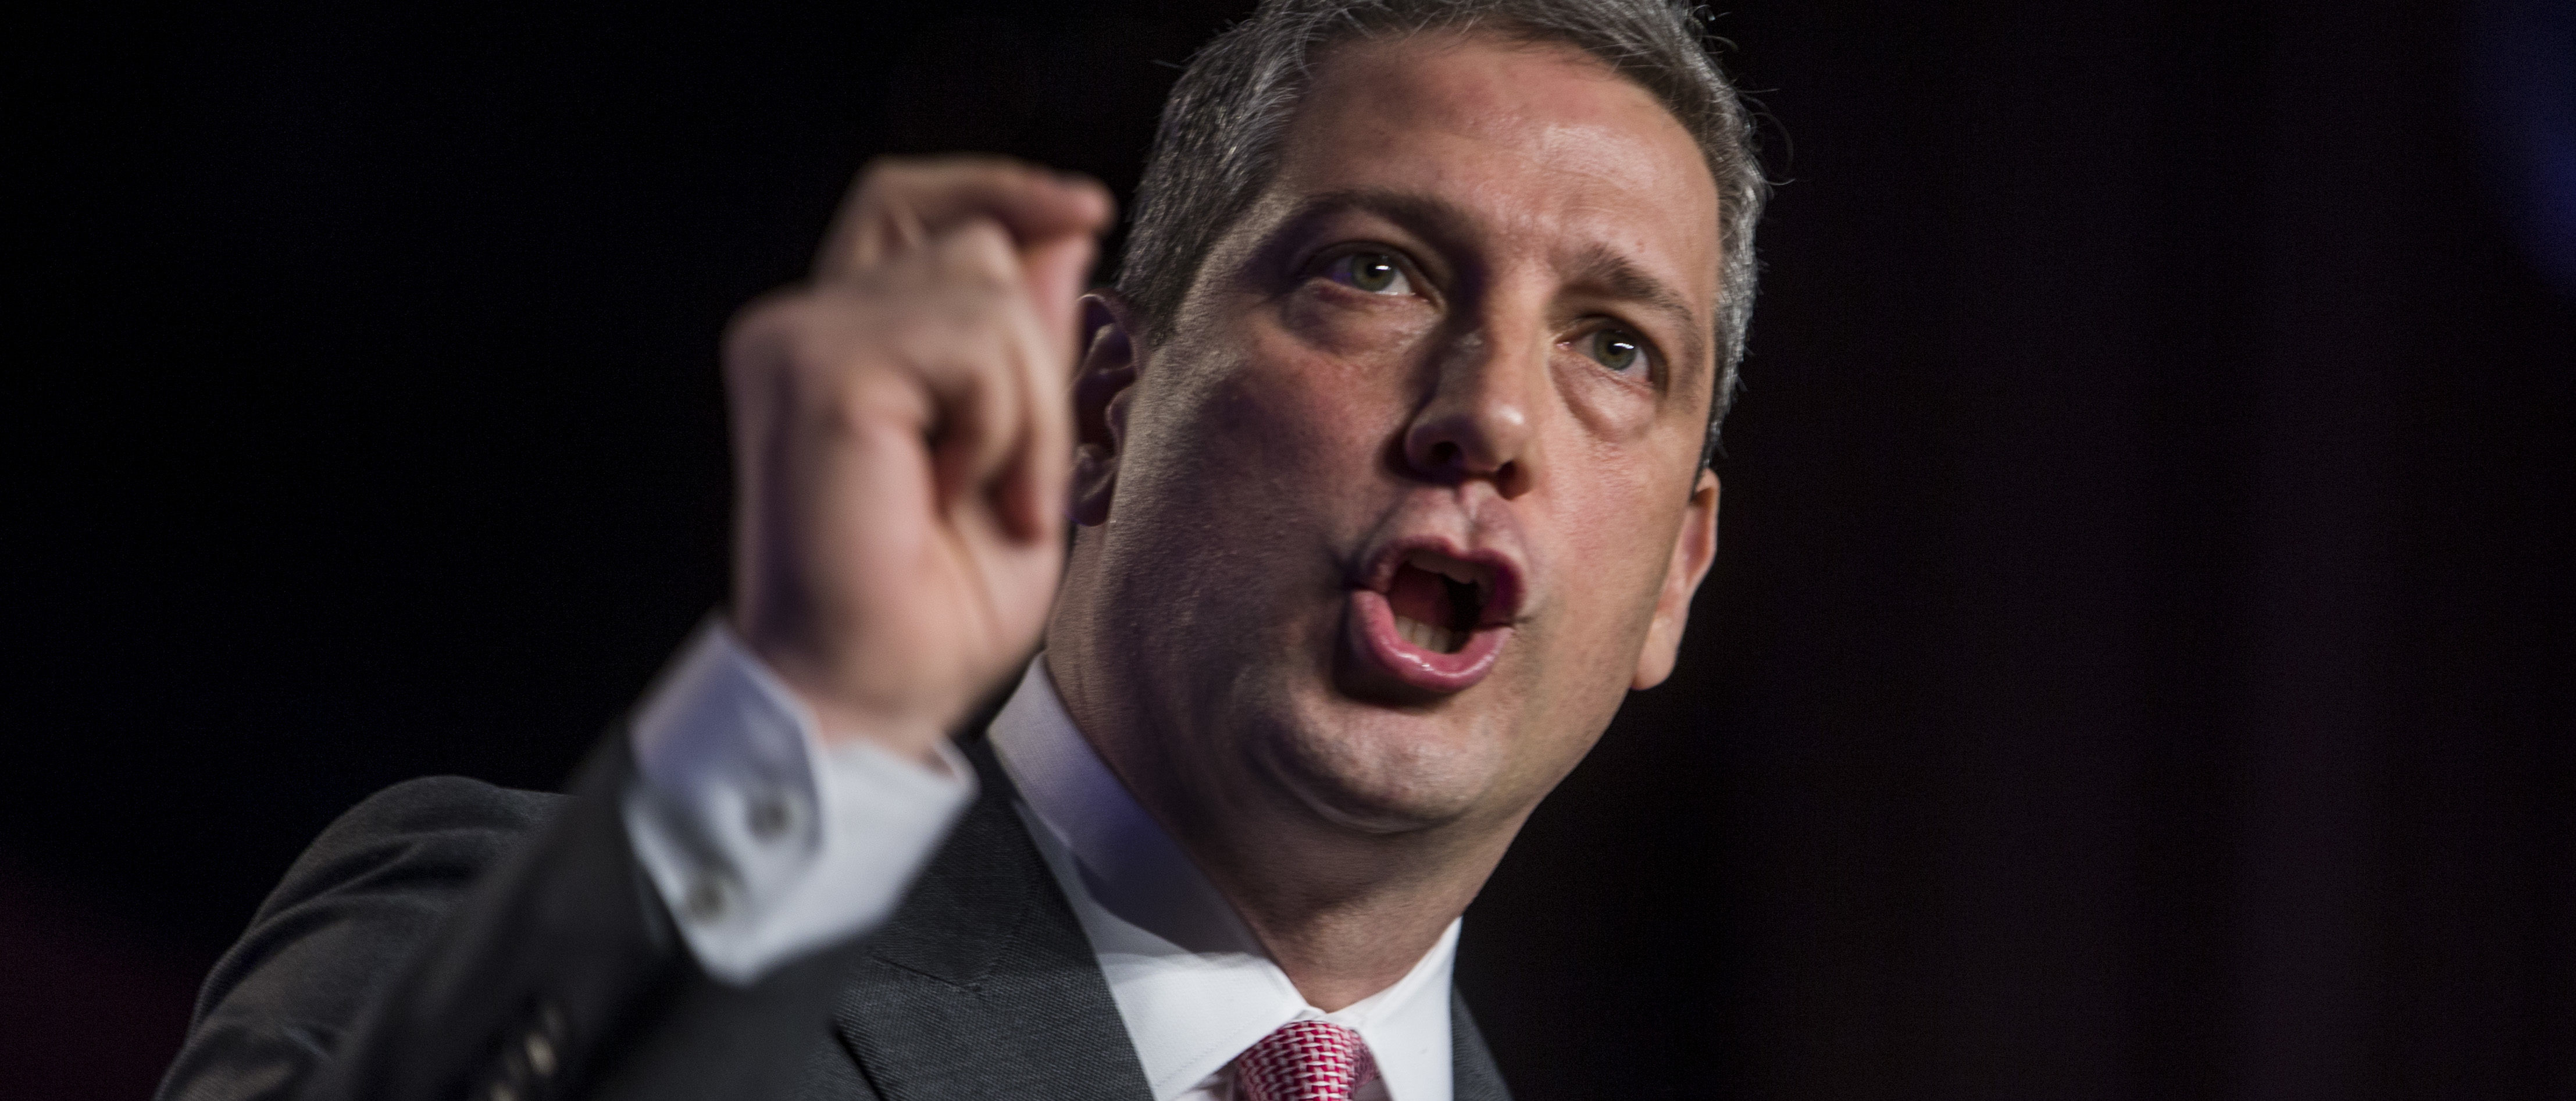 WASHINGTON, DC - APRIL 10: Rep. Tim Ryan (D-OH) speaks during the North American Building Trades Unions Conference at the Washington Hilton April 10, 2019 in Washington, DC. Many Democrat presidential hopefuls attended the conference in hopes of drawing the labor vote. (Photo by Zach Gibson/Getty Images)